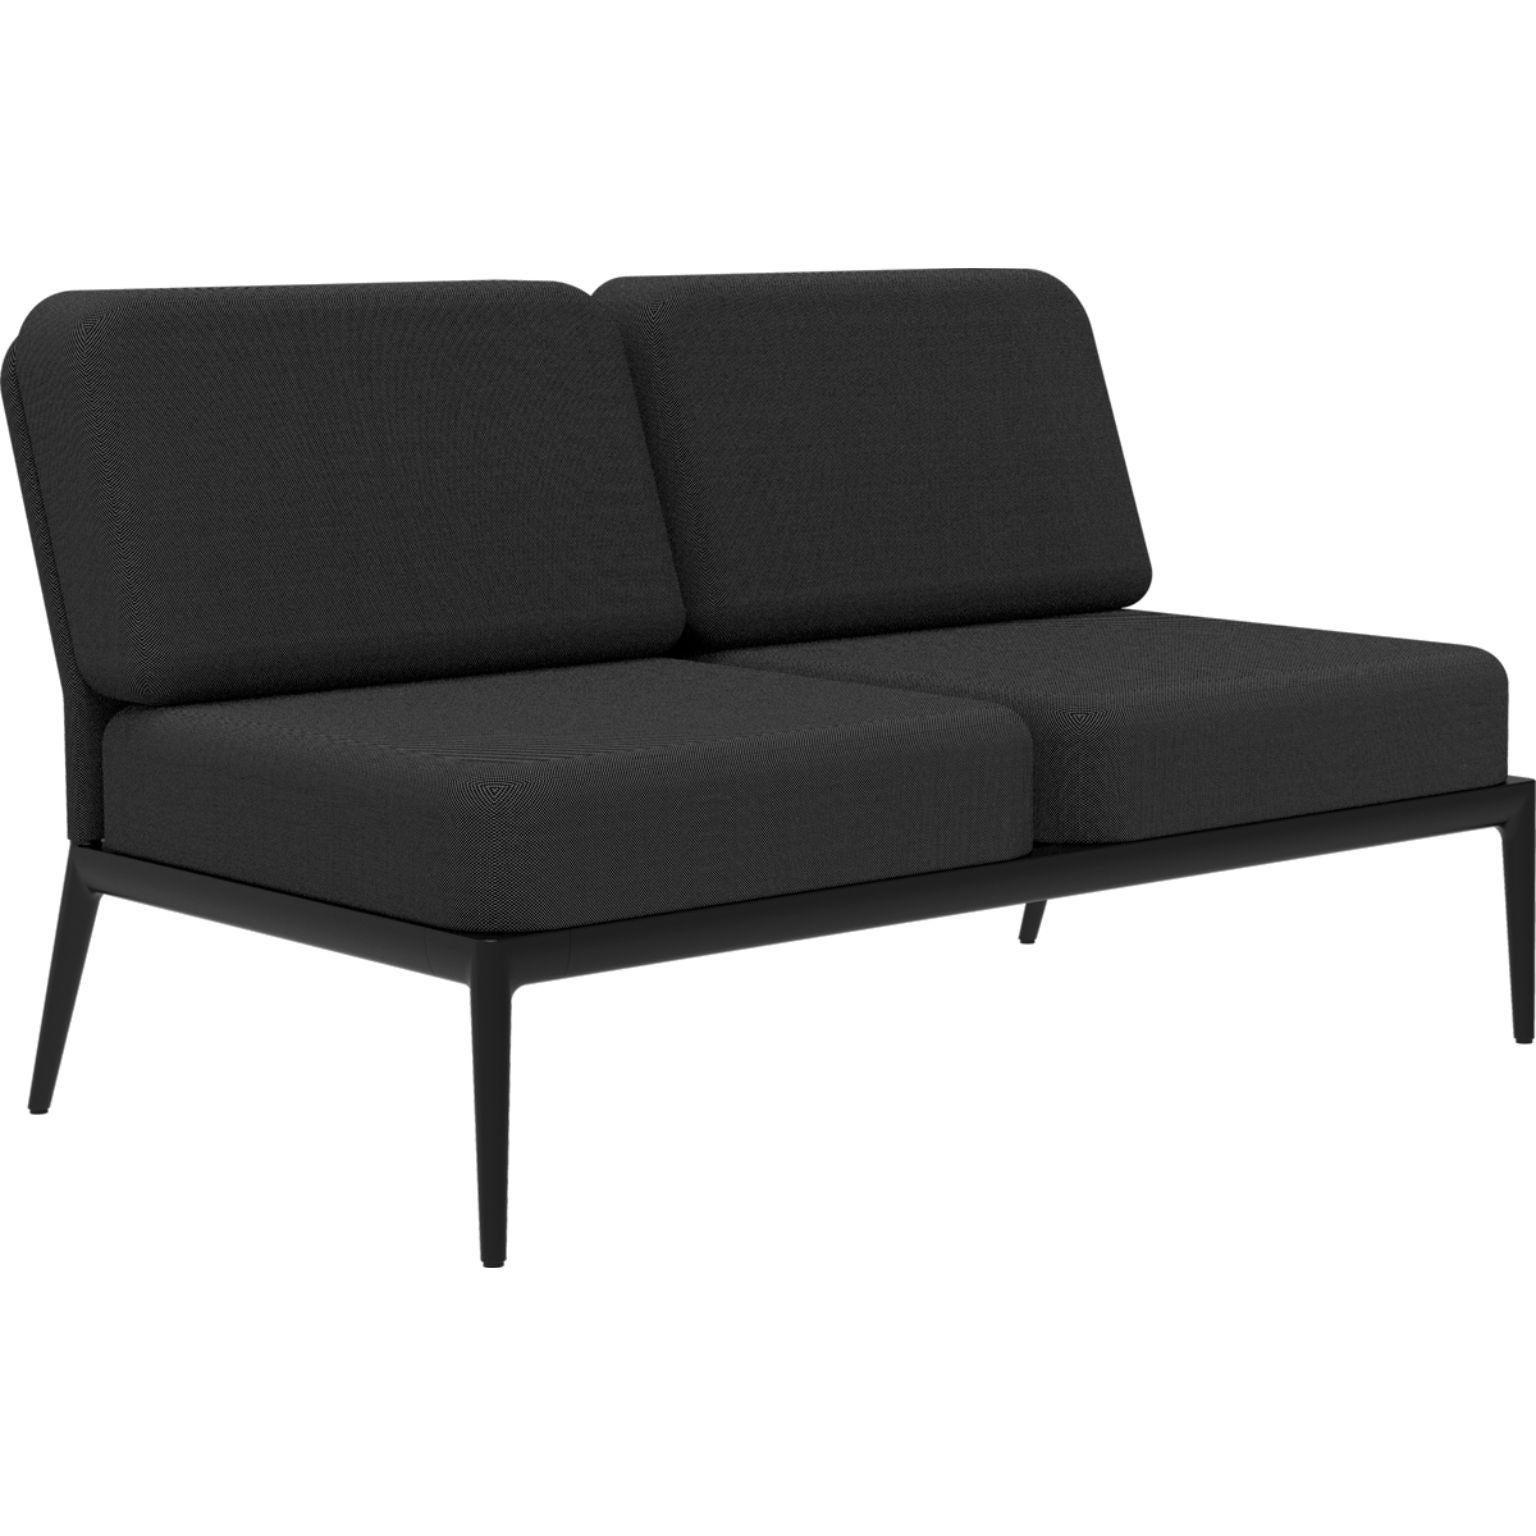 Cover black double central modular sofa by MOWEE
Dimensions: D 83 x W 136 x H 81 cm (seat height 42 cm).
Material: Aluminum and upholstery.
Weight: 27 kg.
Also available in different colors and finishes.

An unmistakable collection for its